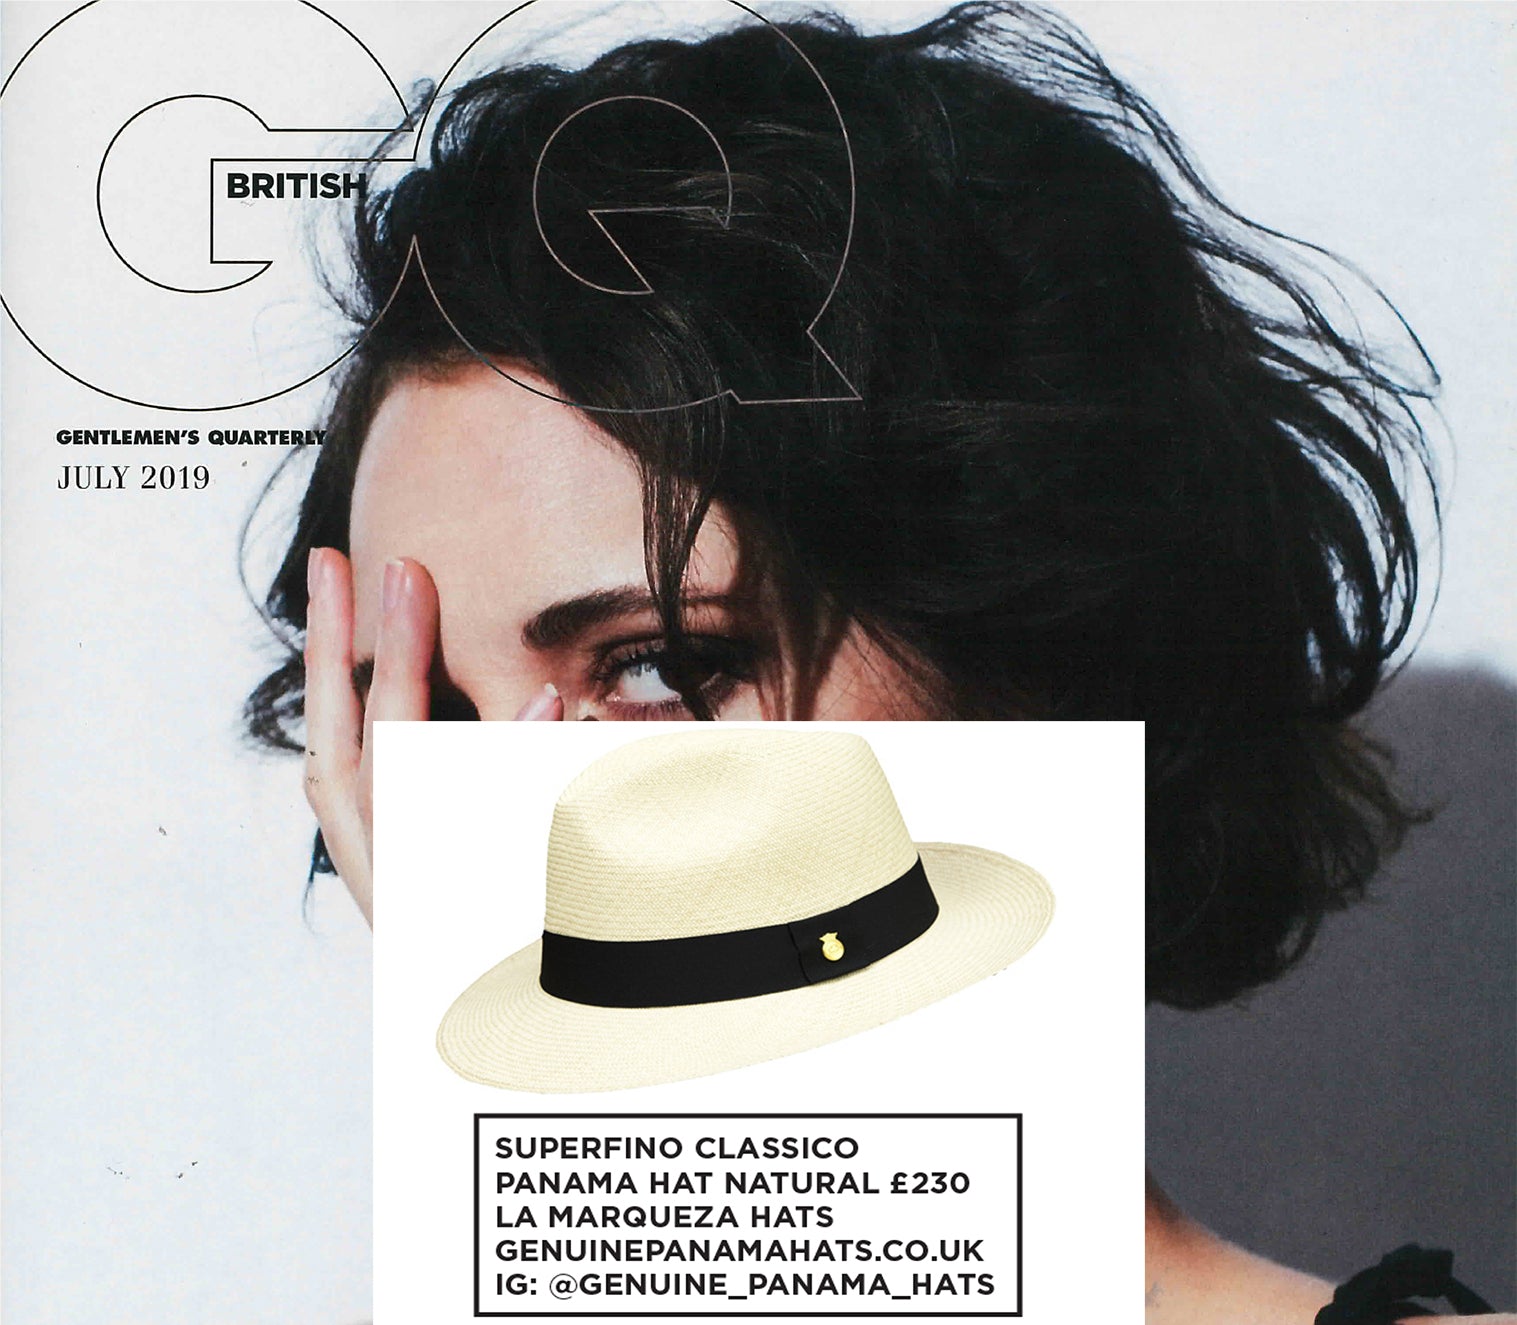 BRITISH GQ FEATURES THE SUPERFINO CLASSICO NATURAL BY LA MARQUEZA HATS, ISSUE JULY 2019